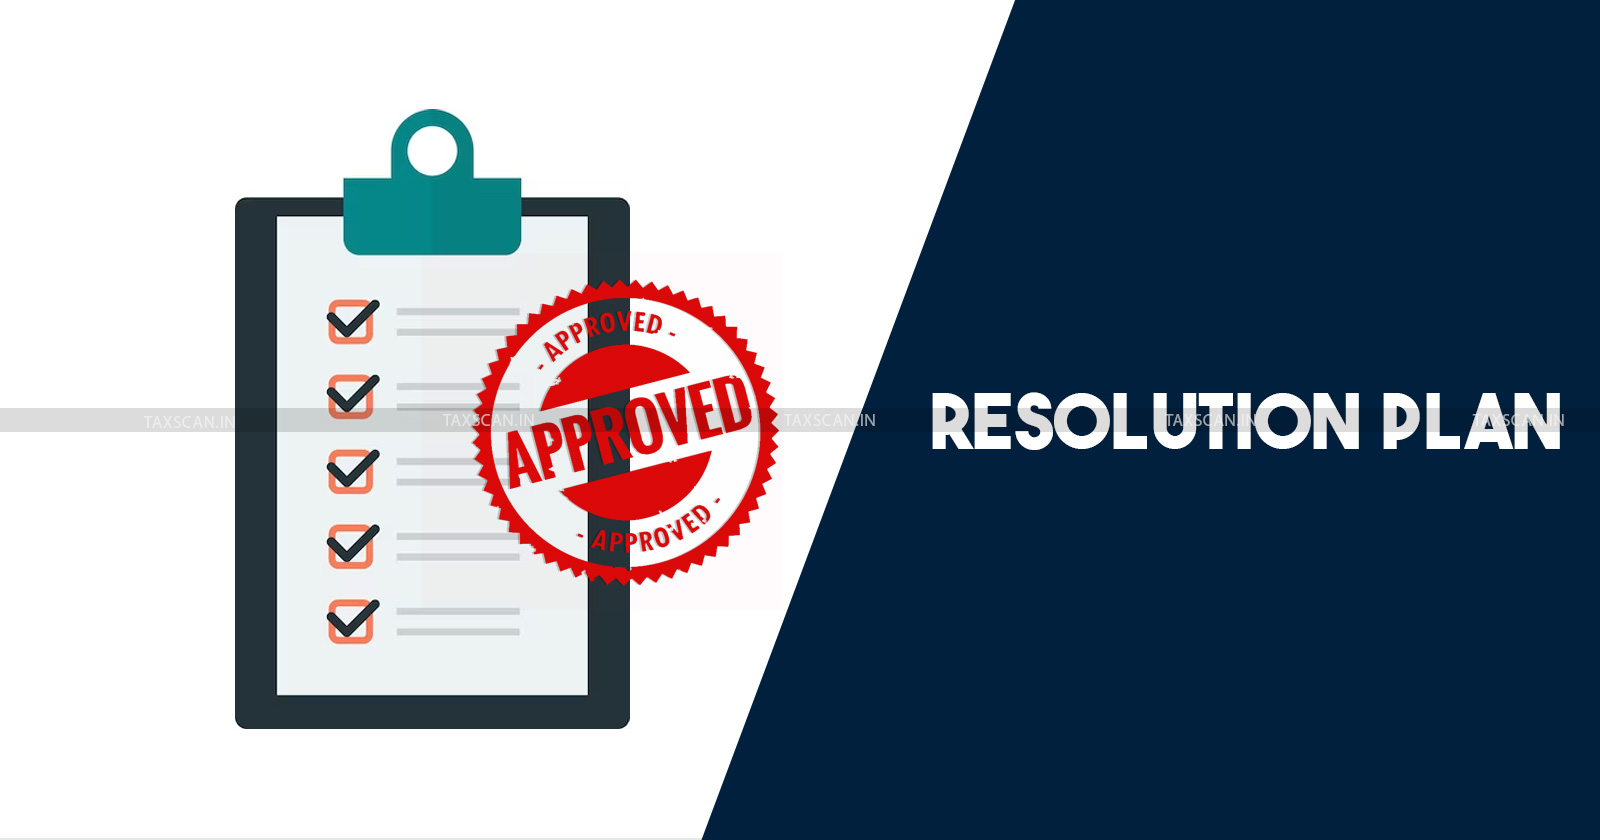 NCLAT - Resolution Applicant - Approval of Resolution Plan - taxscan